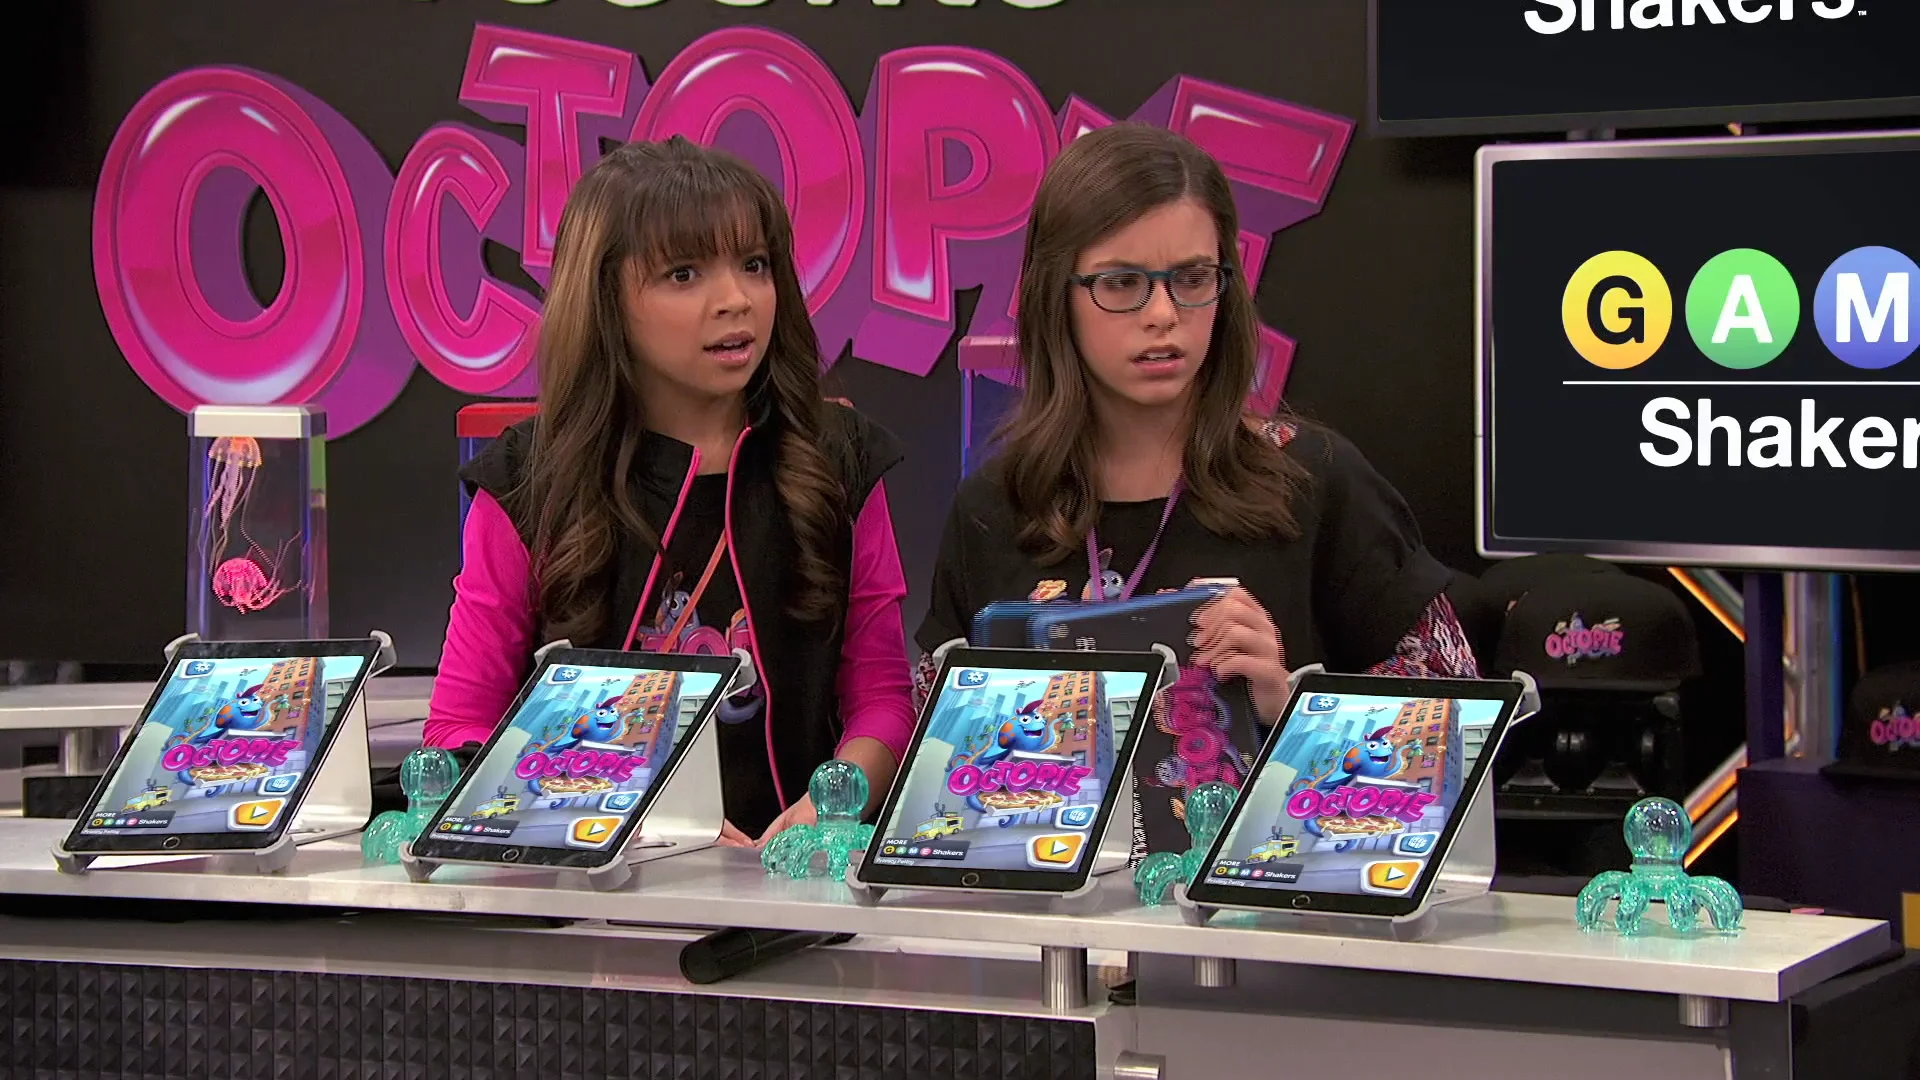 Game Shakers: The New Level - (Video Clip)